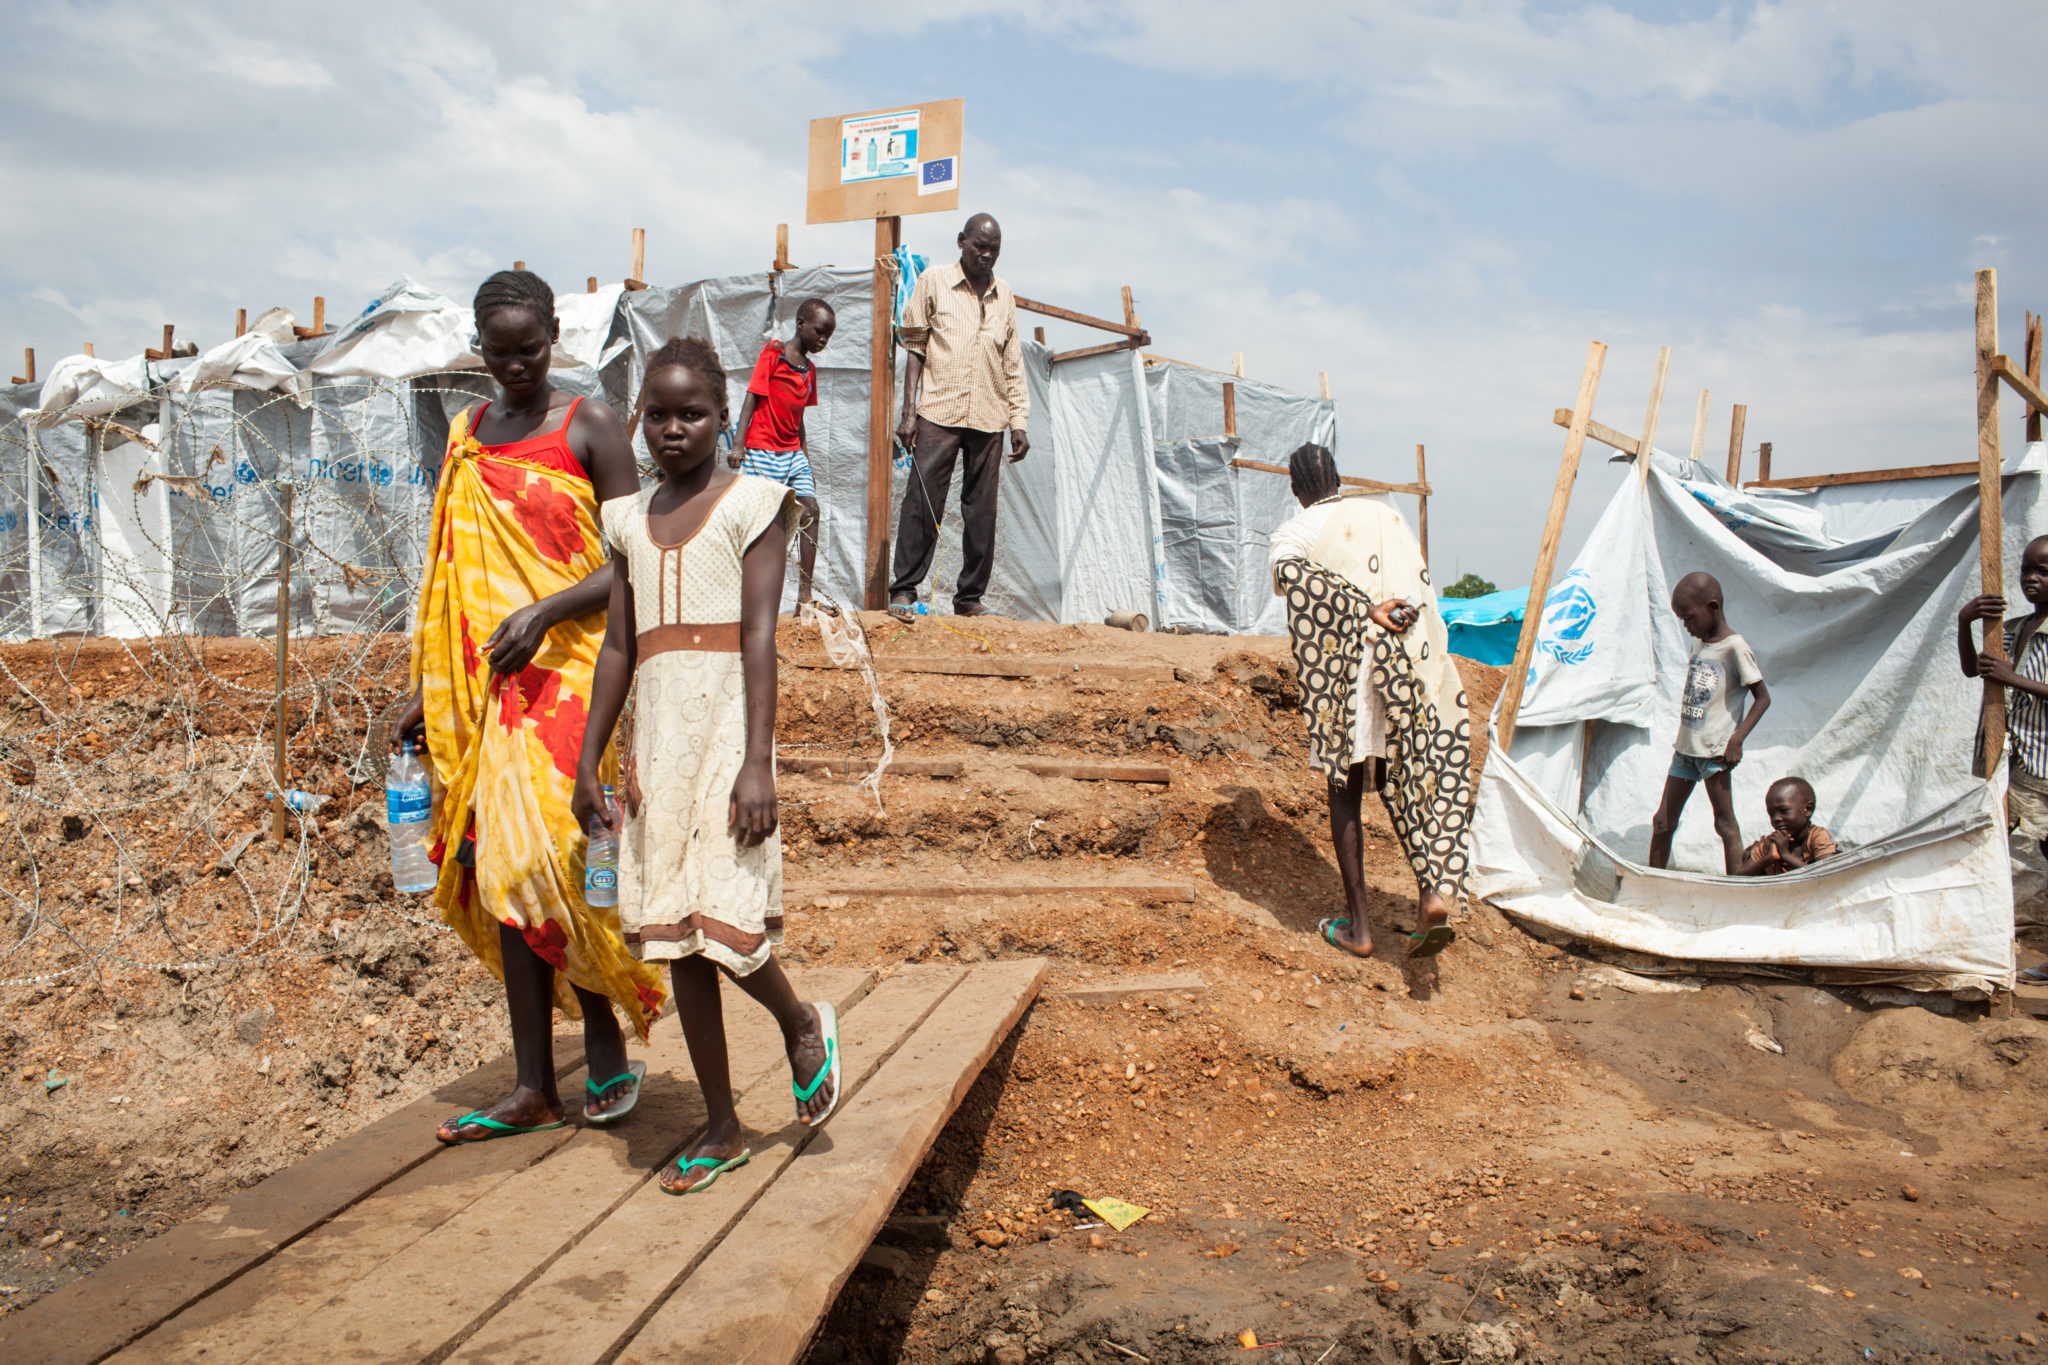 Violence in South Sudan, crisis for working mums and more